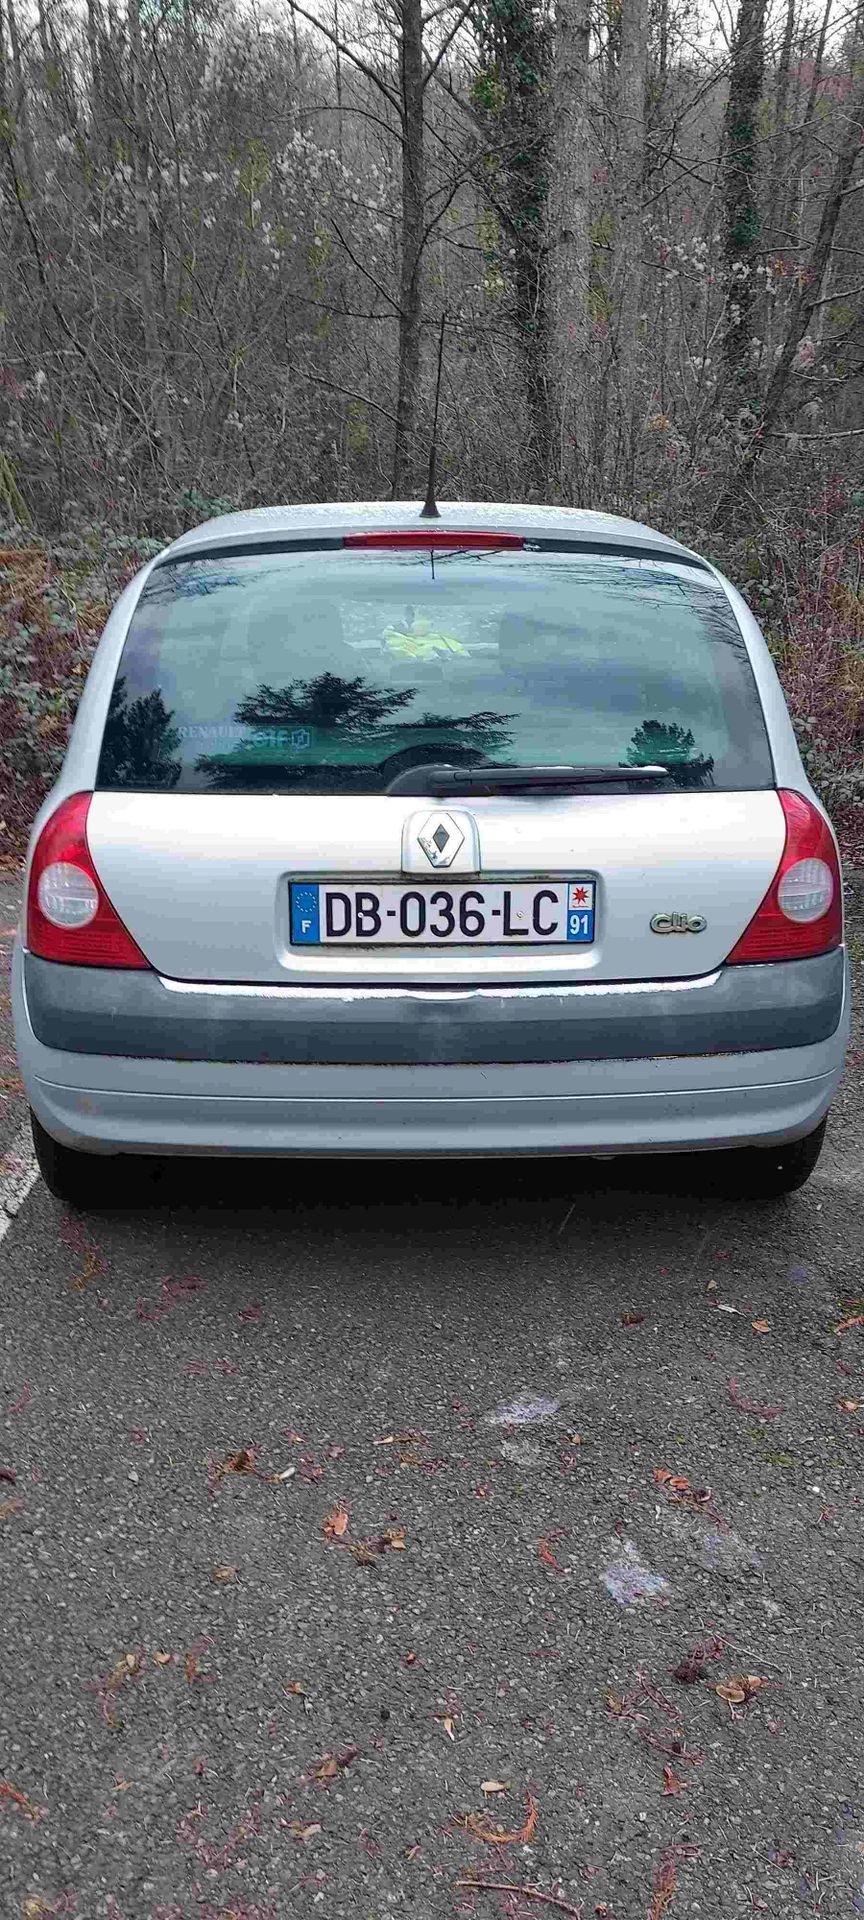 Null [RP] 
	RENAULT CLIO 1.4 i 98, Essence, imm. DB-036-LC, type MRE1312ER016, n&hellip;